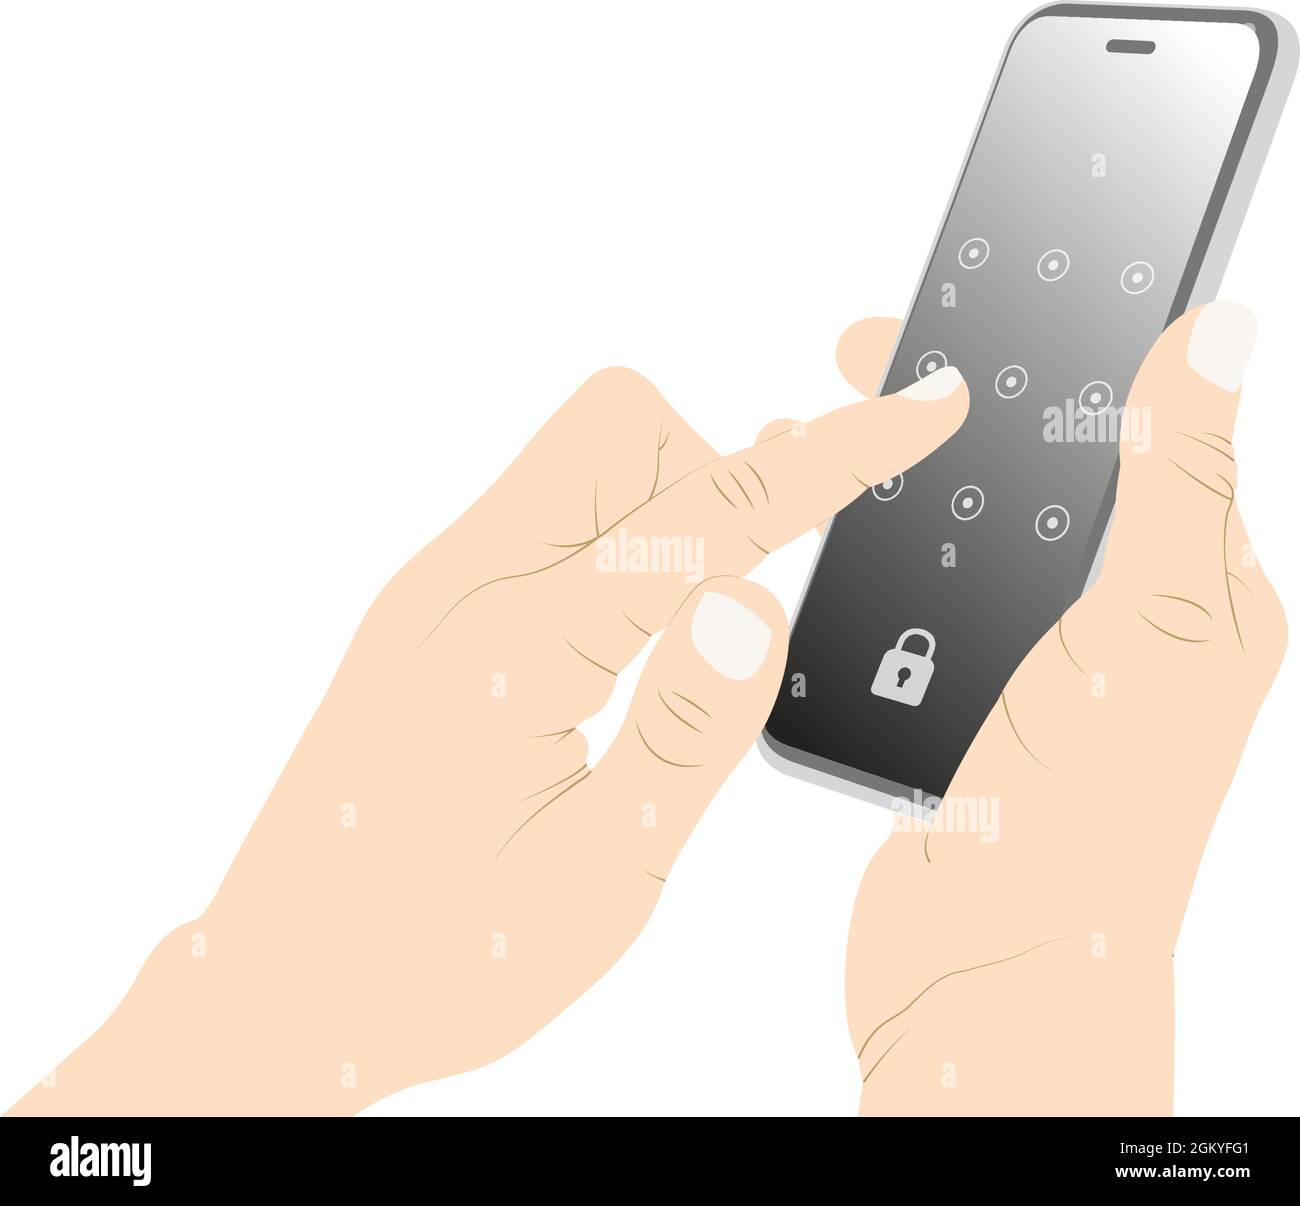 Smartphone security pattern operation, unlocking, locking, entering pin code, phone guard, phone security vector stock illustration Stock Vector